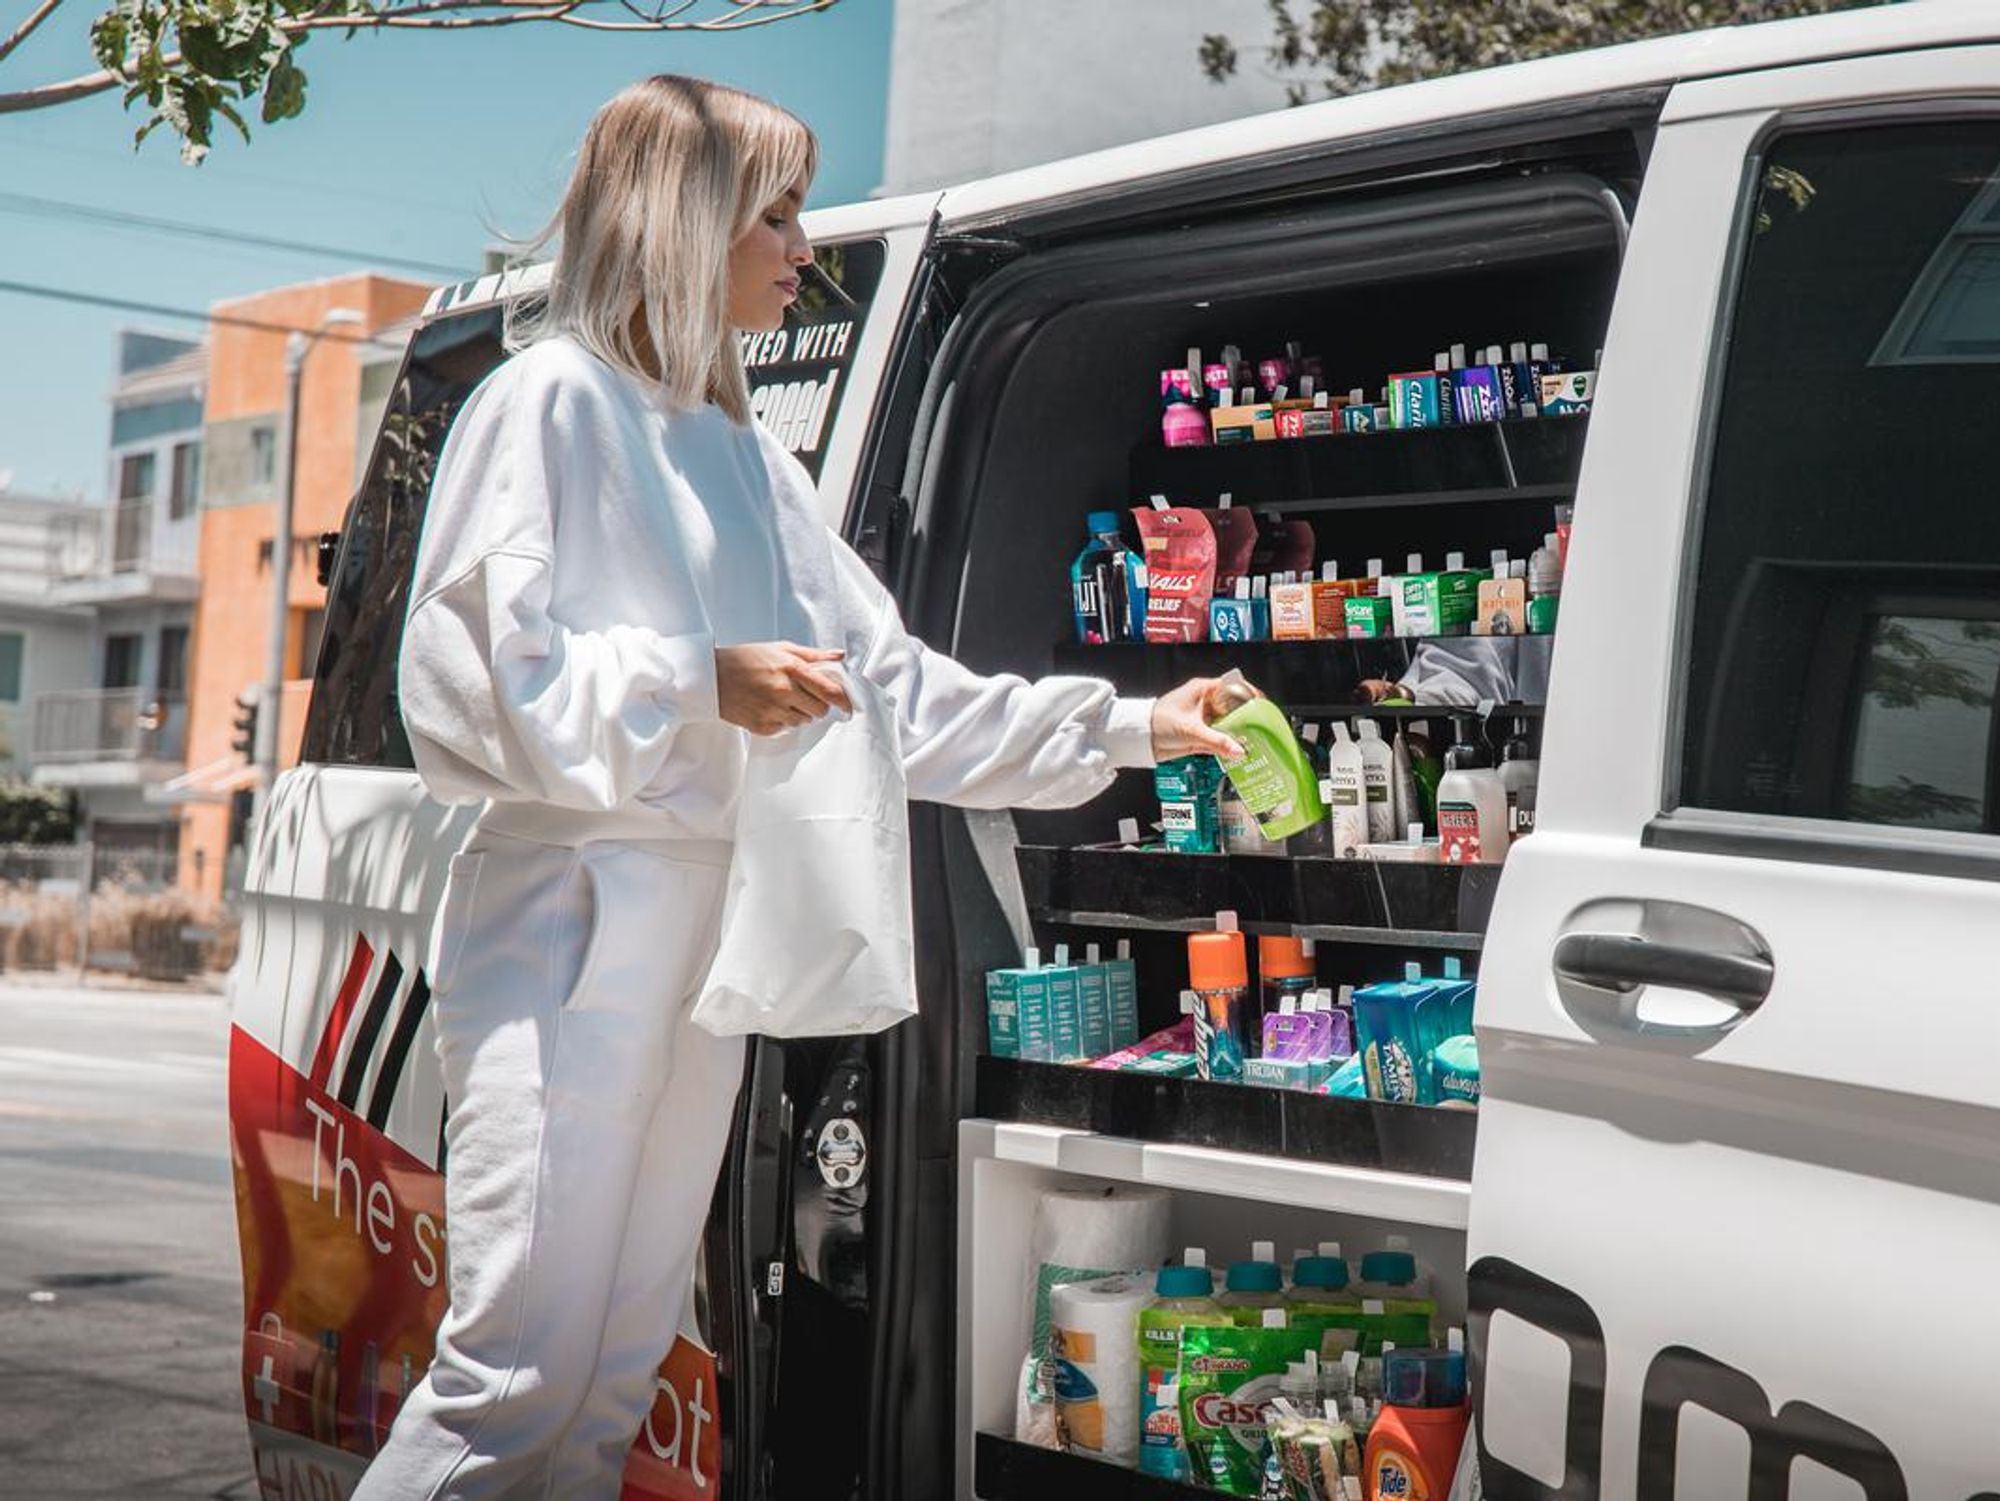 Traffic Woes? In West Hollywood, the Pharmacy Comes to Your House